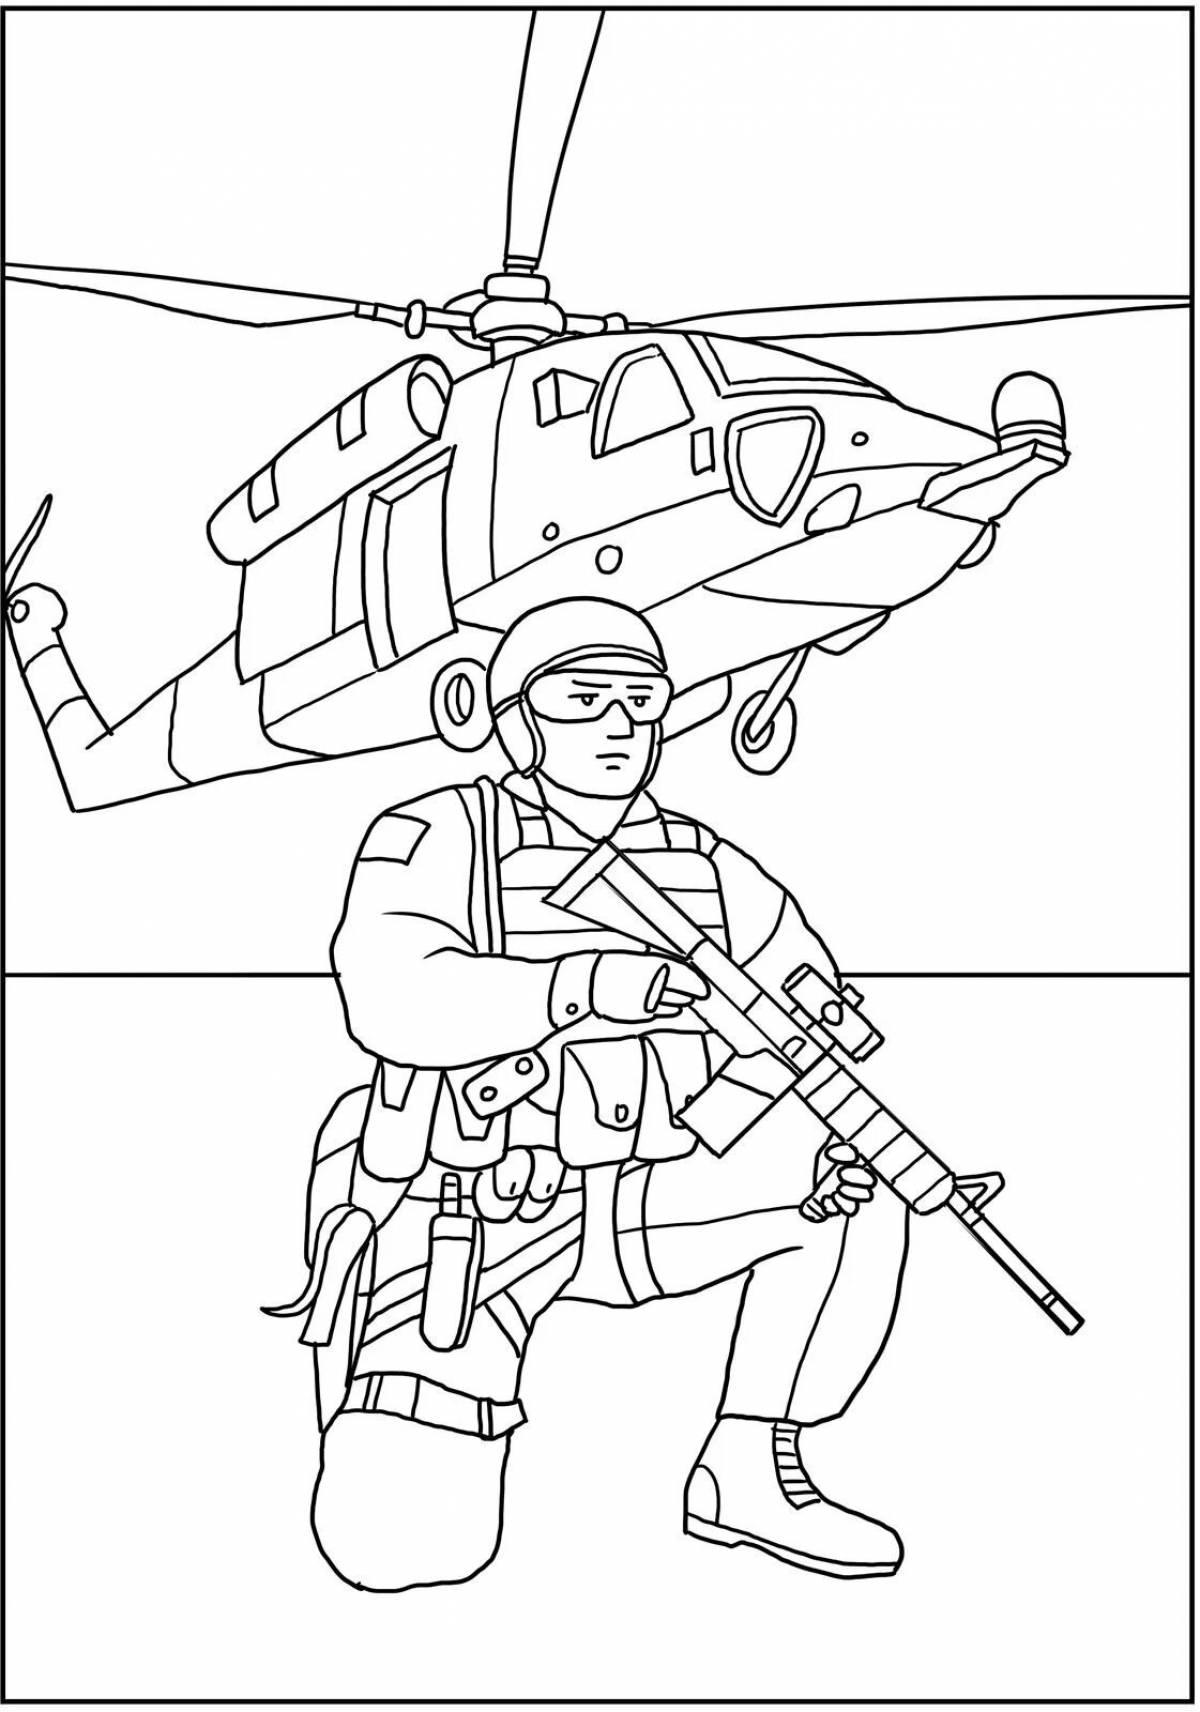 Exquisite military profession coloring book for children